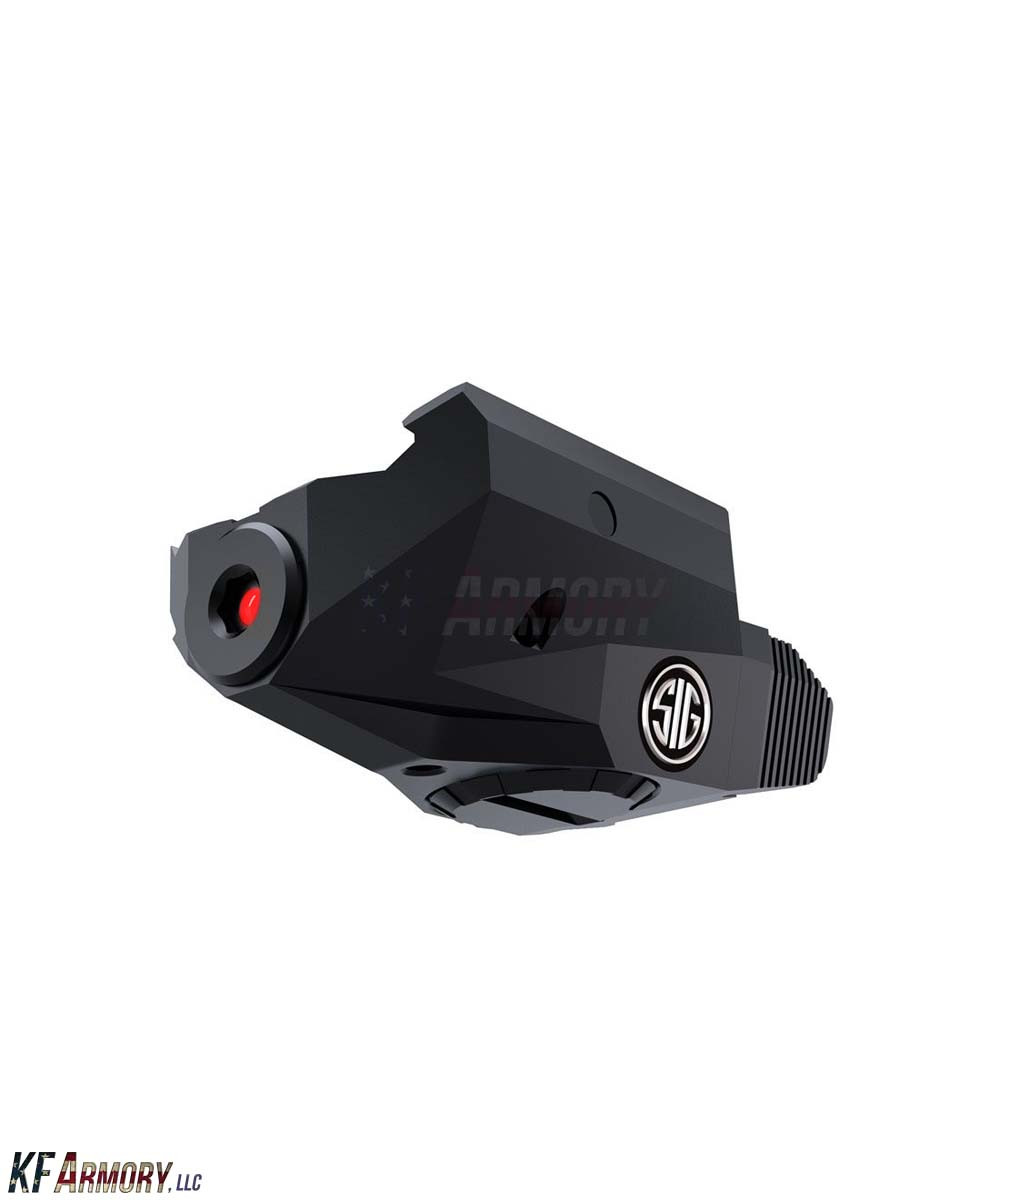 Sig Sauer LIMA1 Red Laser Fits 1913 Picatinny Rail Black Color SOL11001 –  Black Wolf Supply